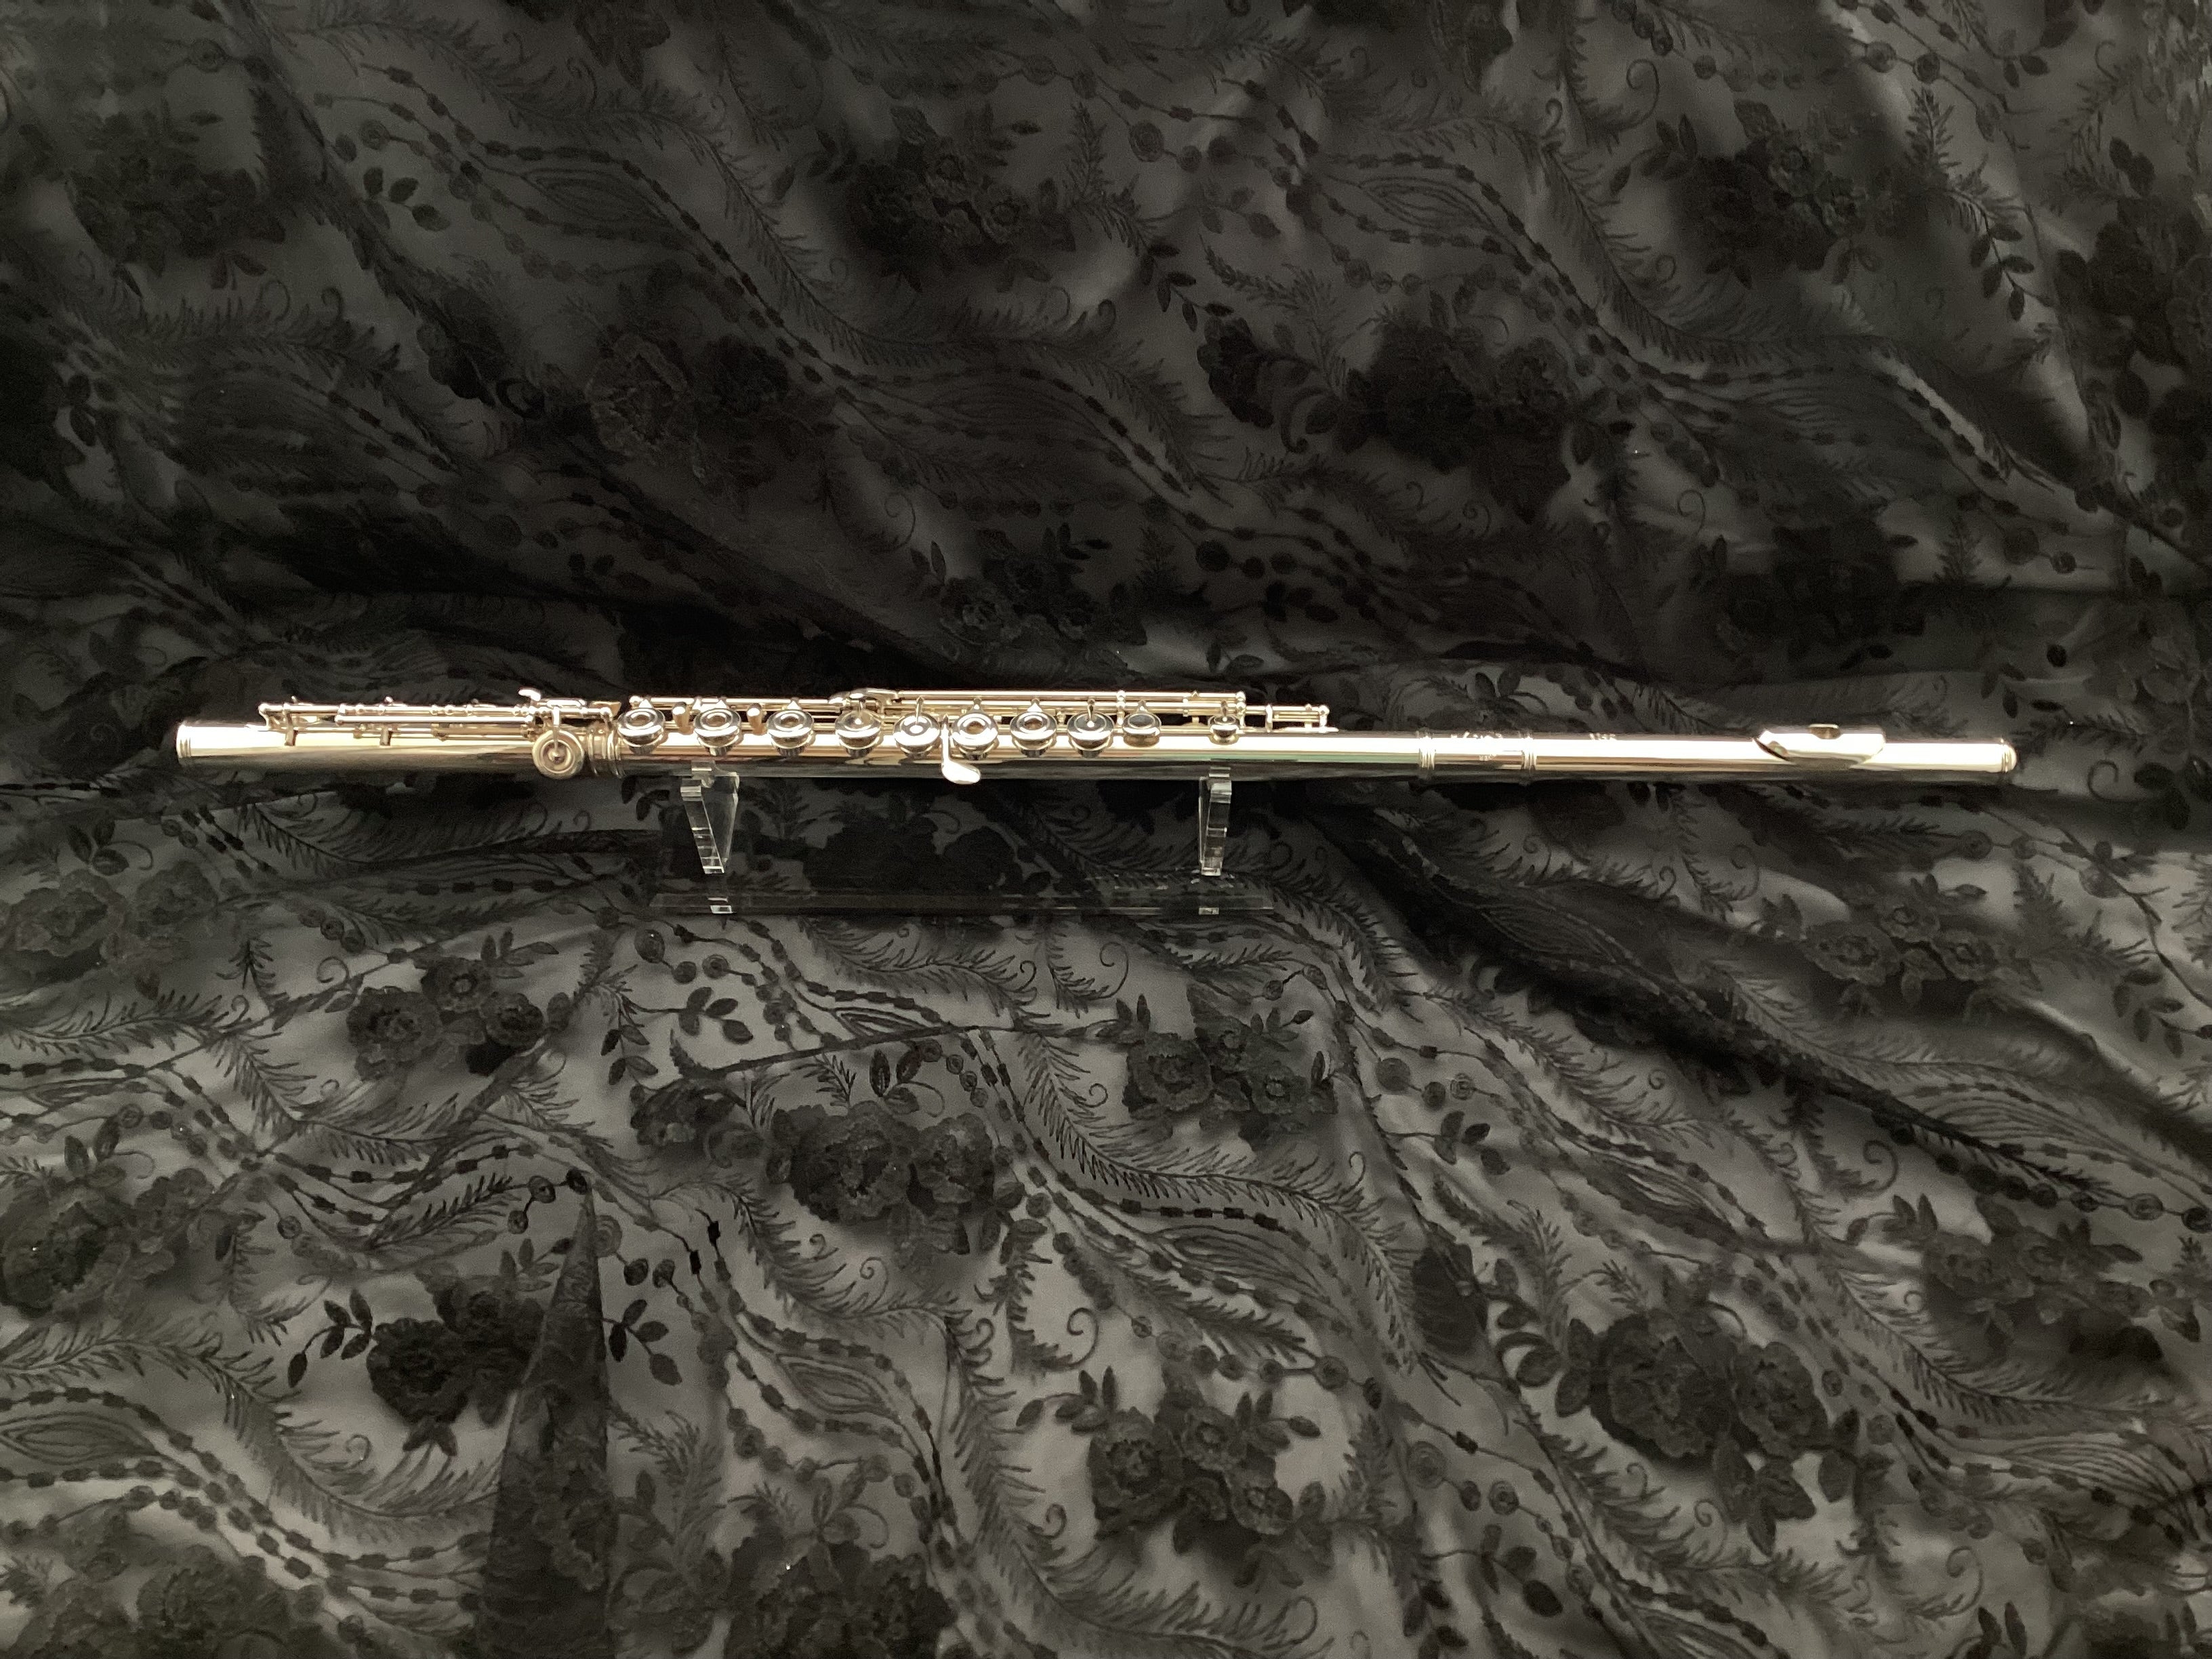 Shop All Pre-Owned – Pro Flutes